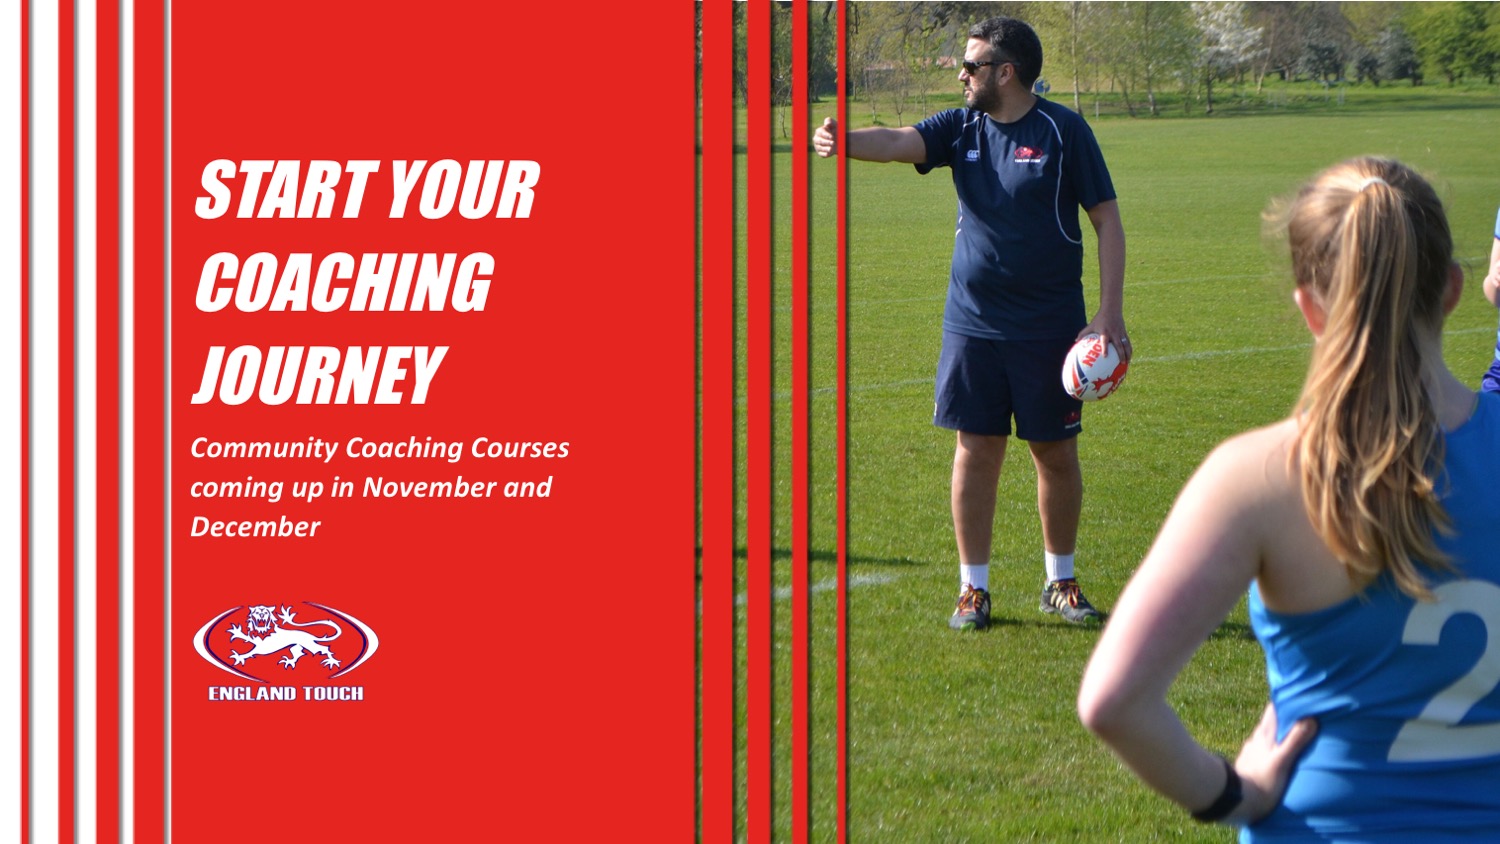 Community Coaching Courses coming up in November and December